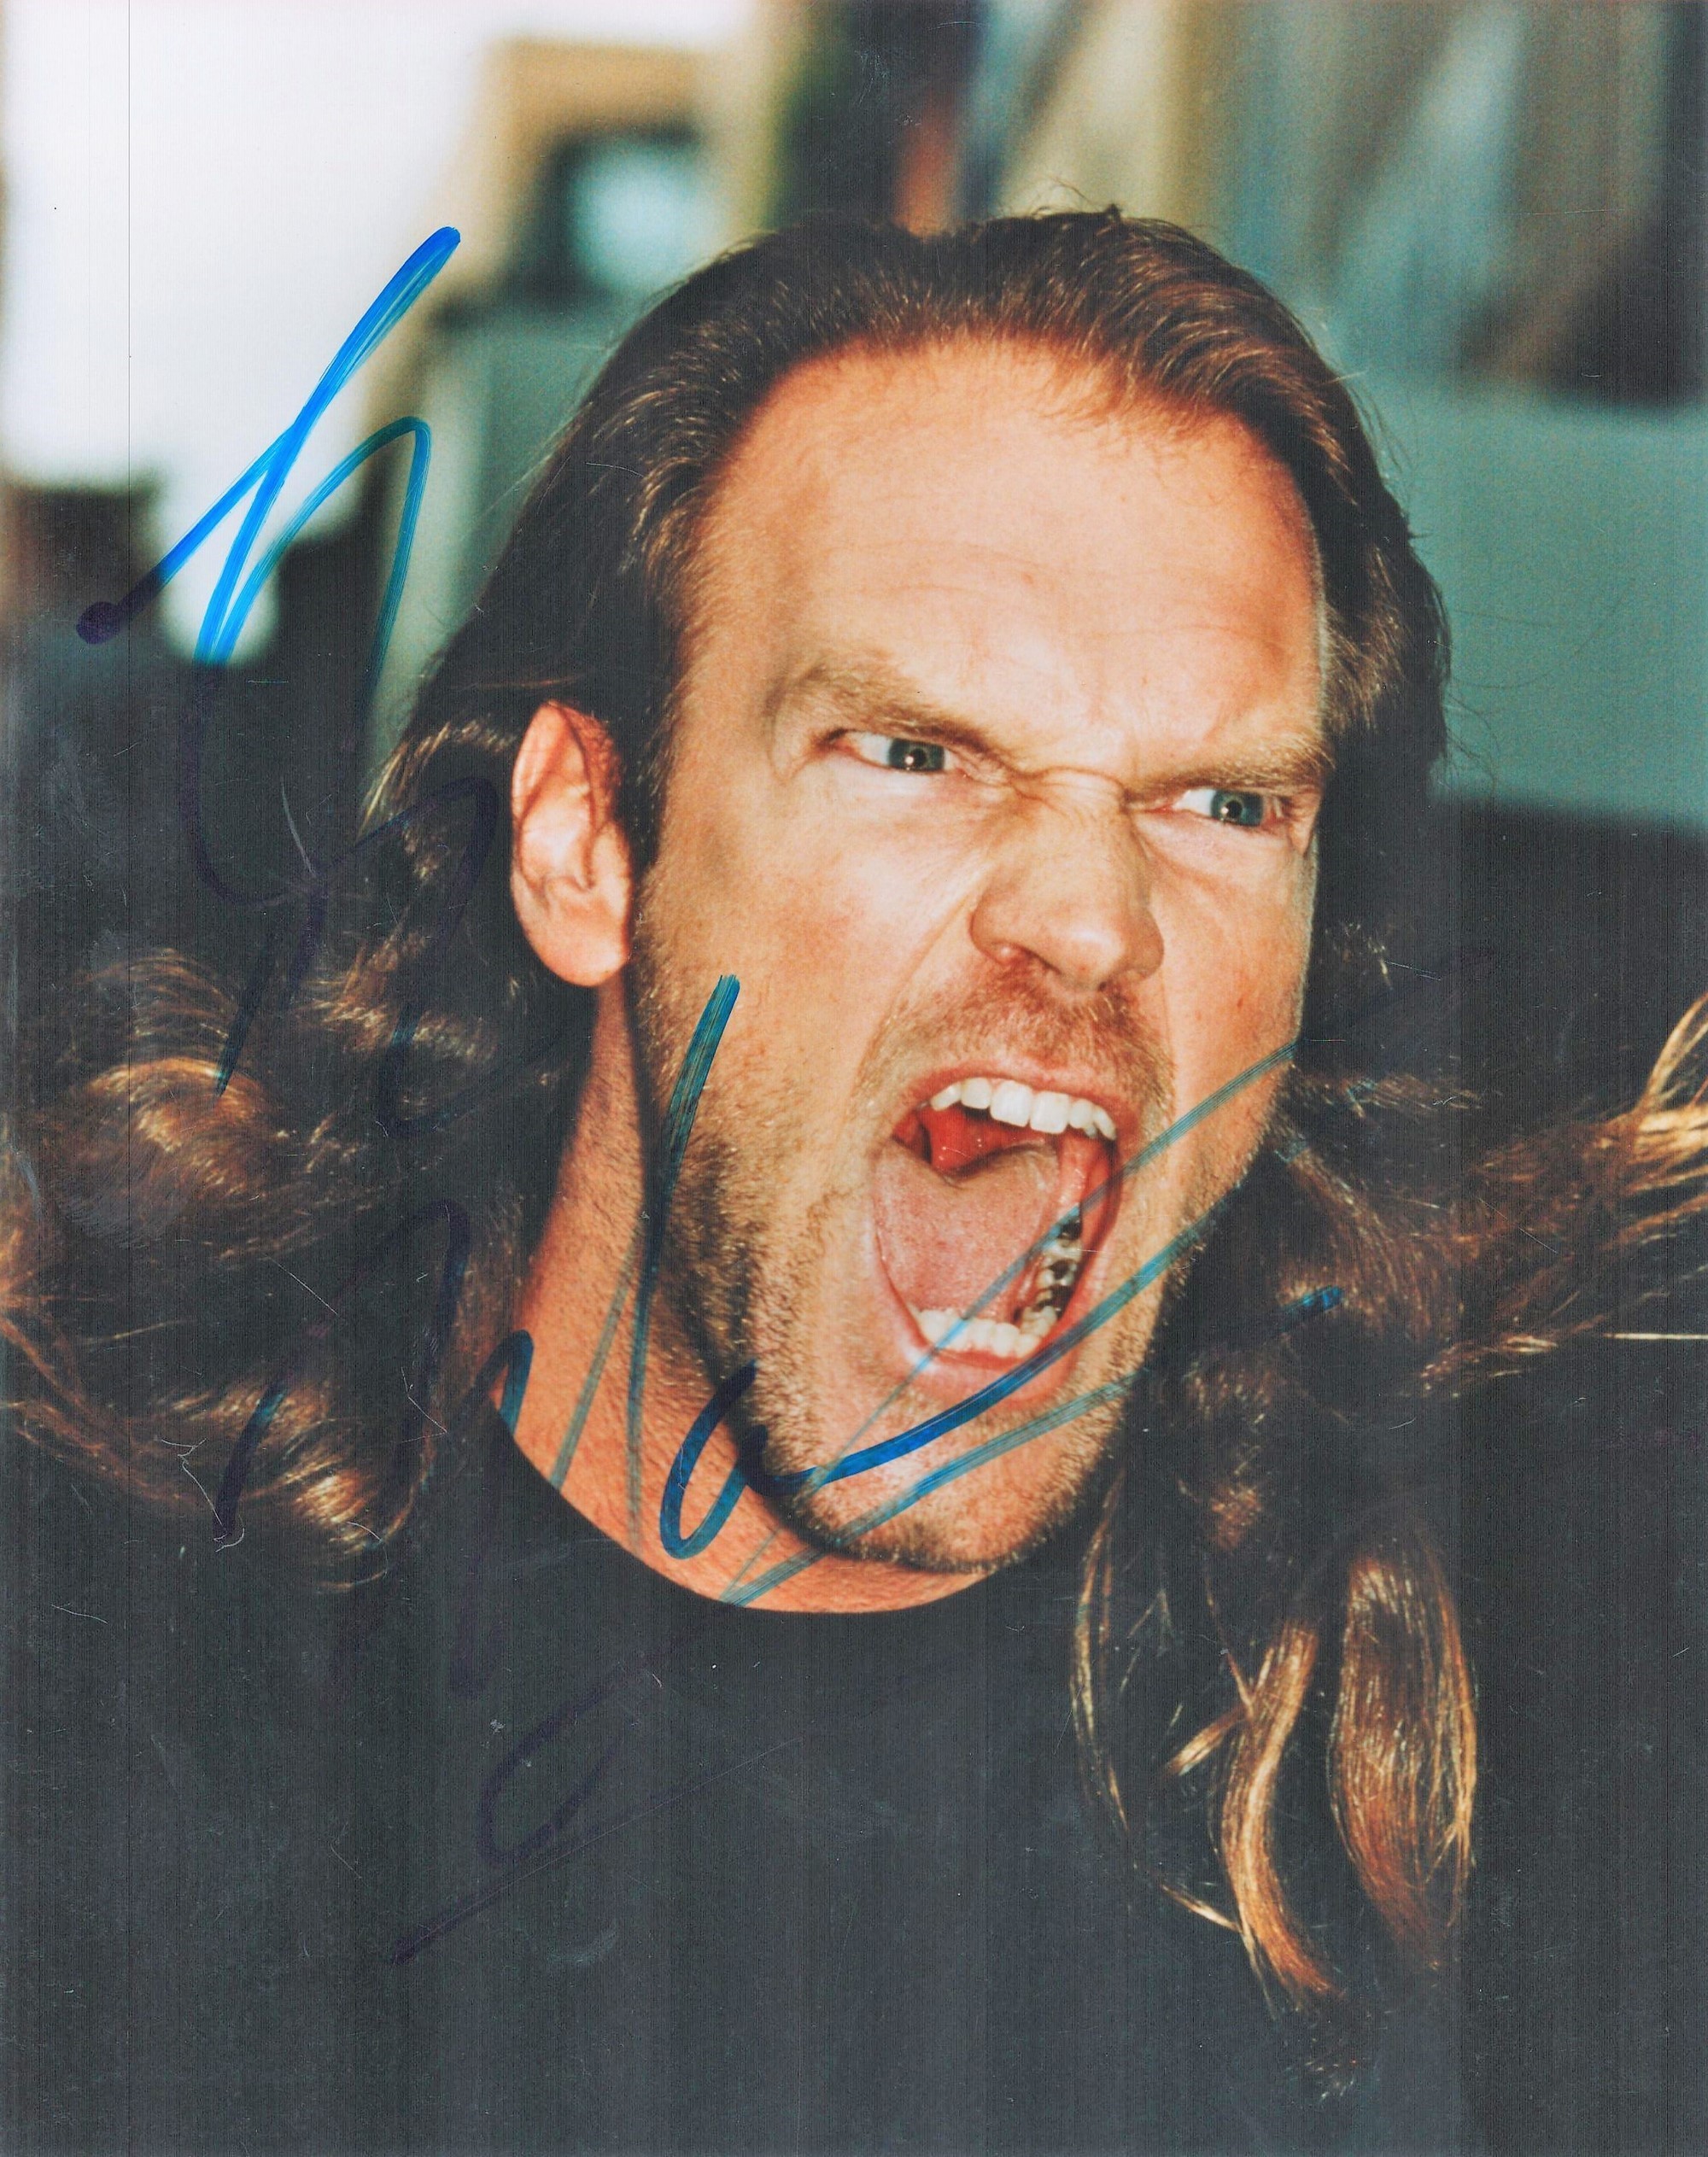 Actor, Tyler Mane signed 10x8 colour photograph. Mane is known for playing Sabretooth in X-Men, Ajax